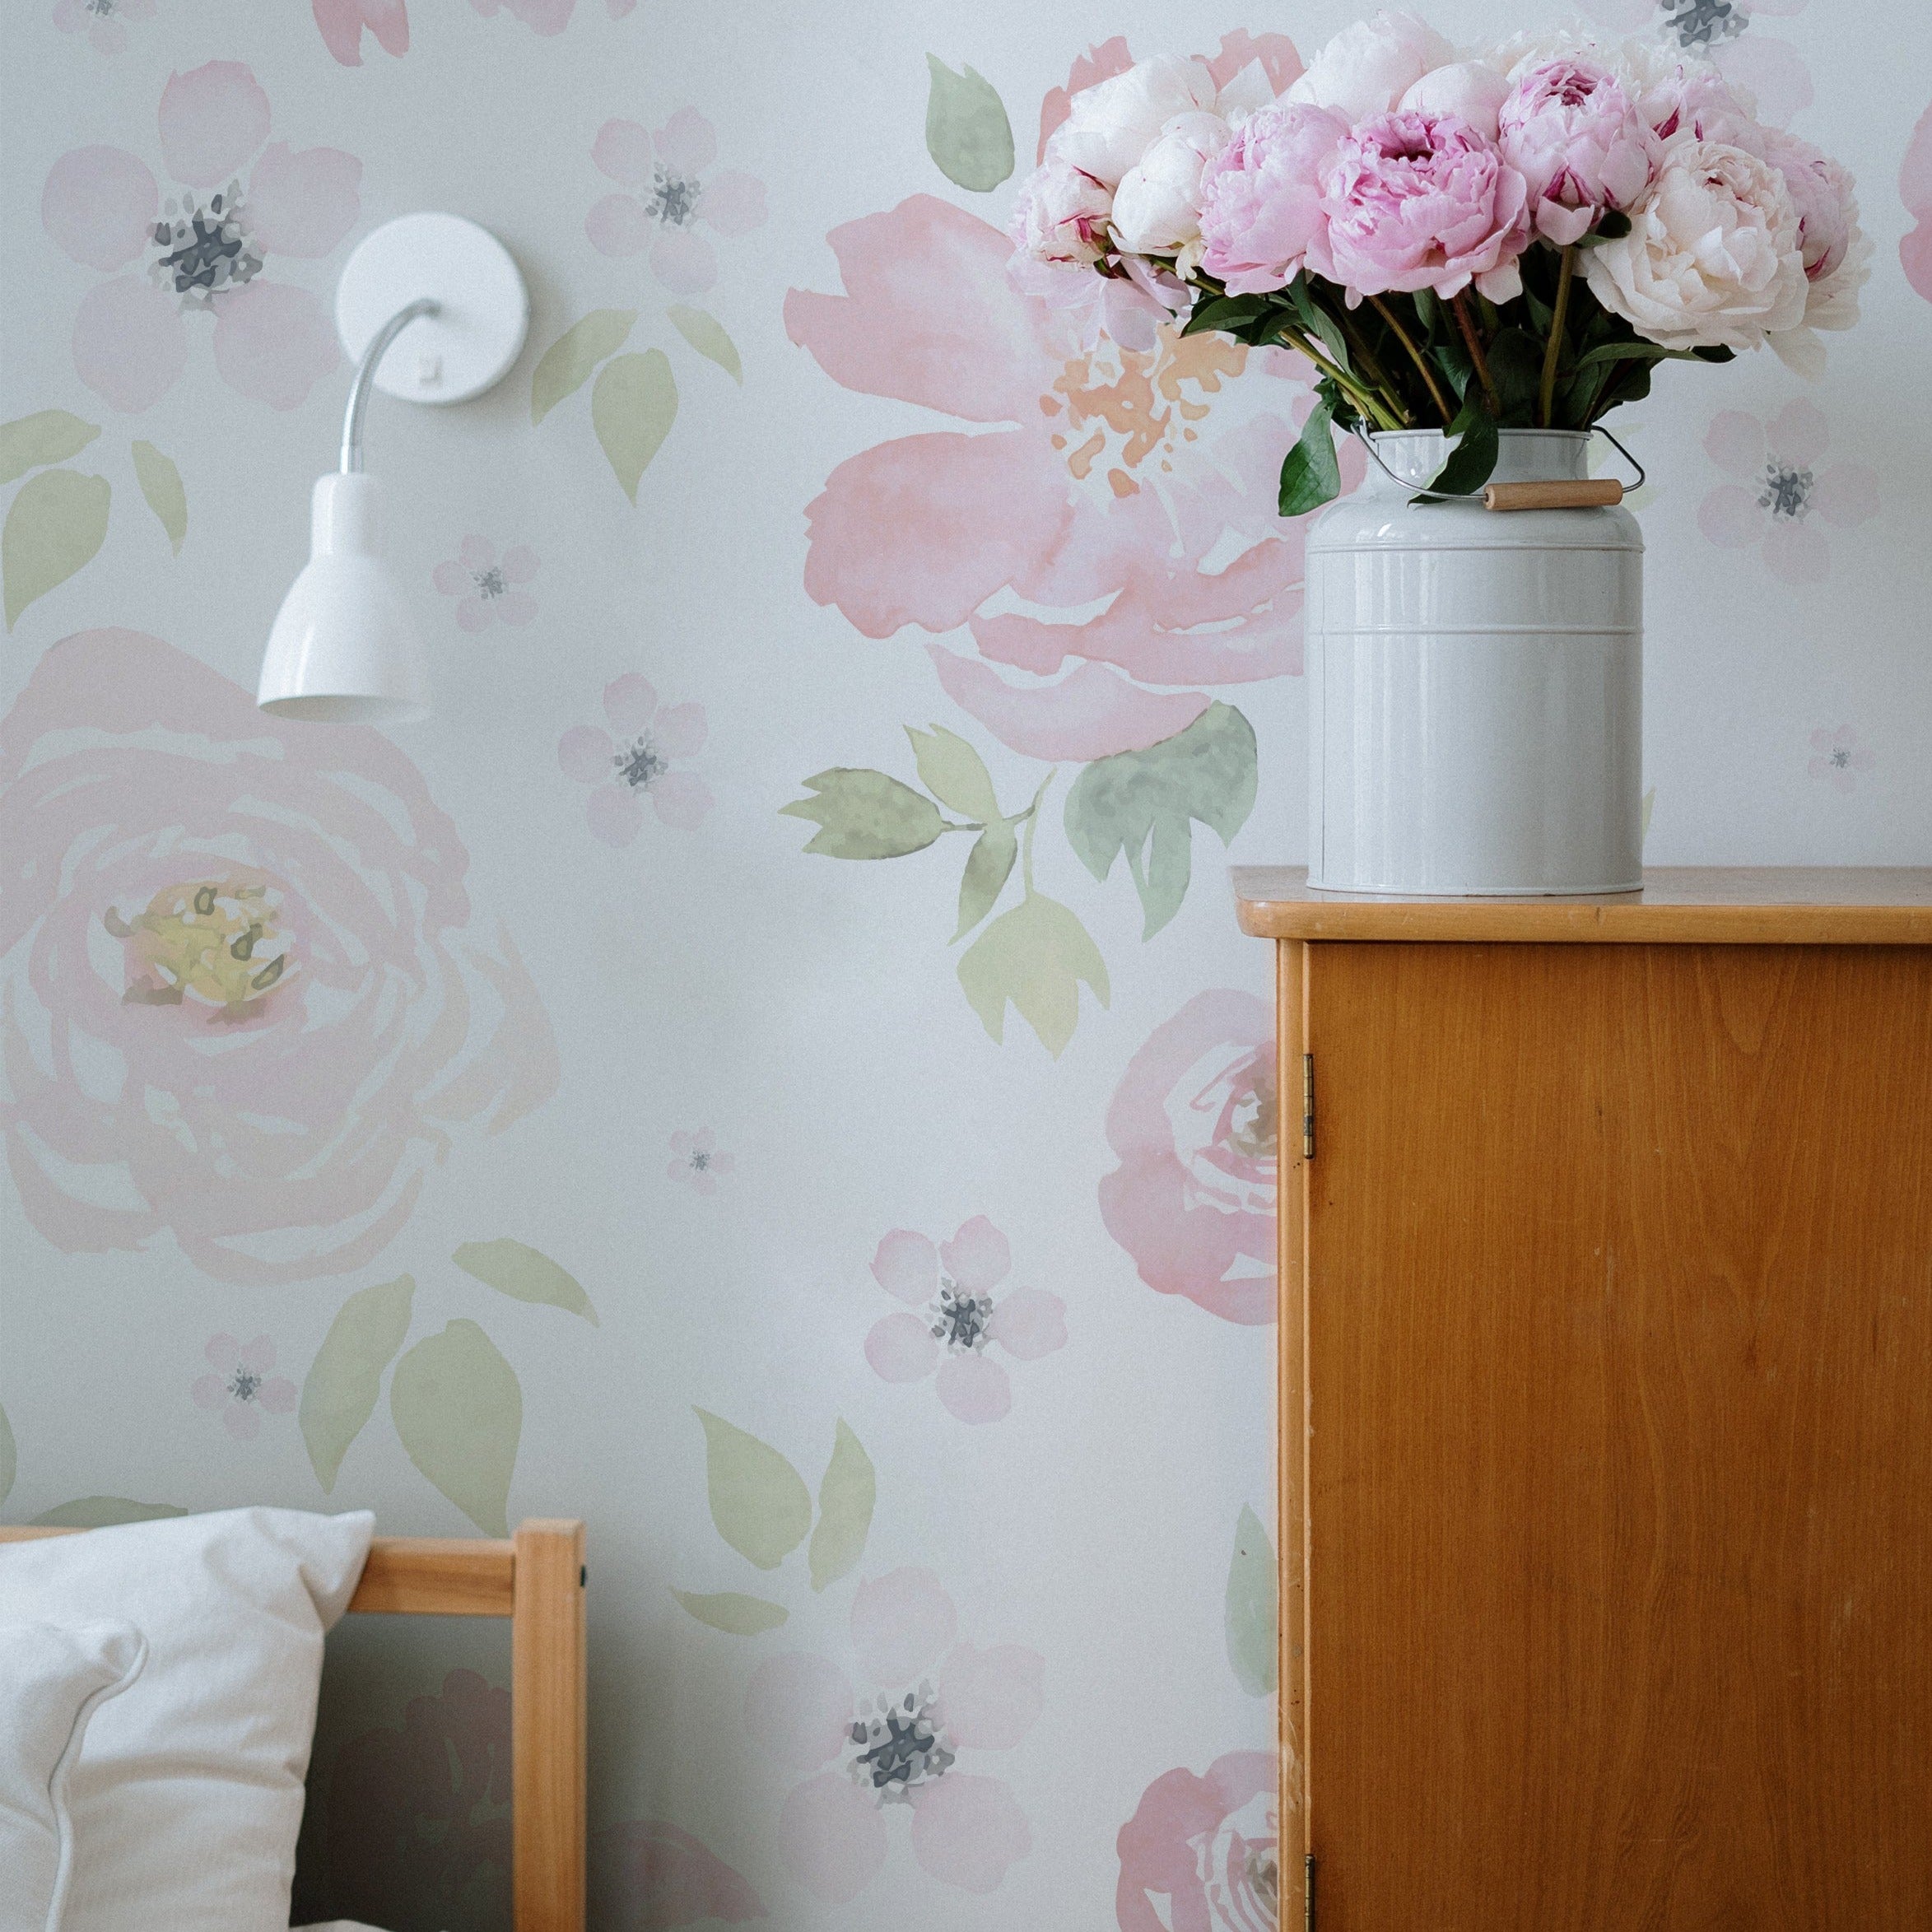 A corner of a bedroom with natural wood furniture, where a vase of fresh pink peonies on a nightstand complements the 'Gentle Blossom Wallpaper', enhancing the room's romantic and serene ambiance.